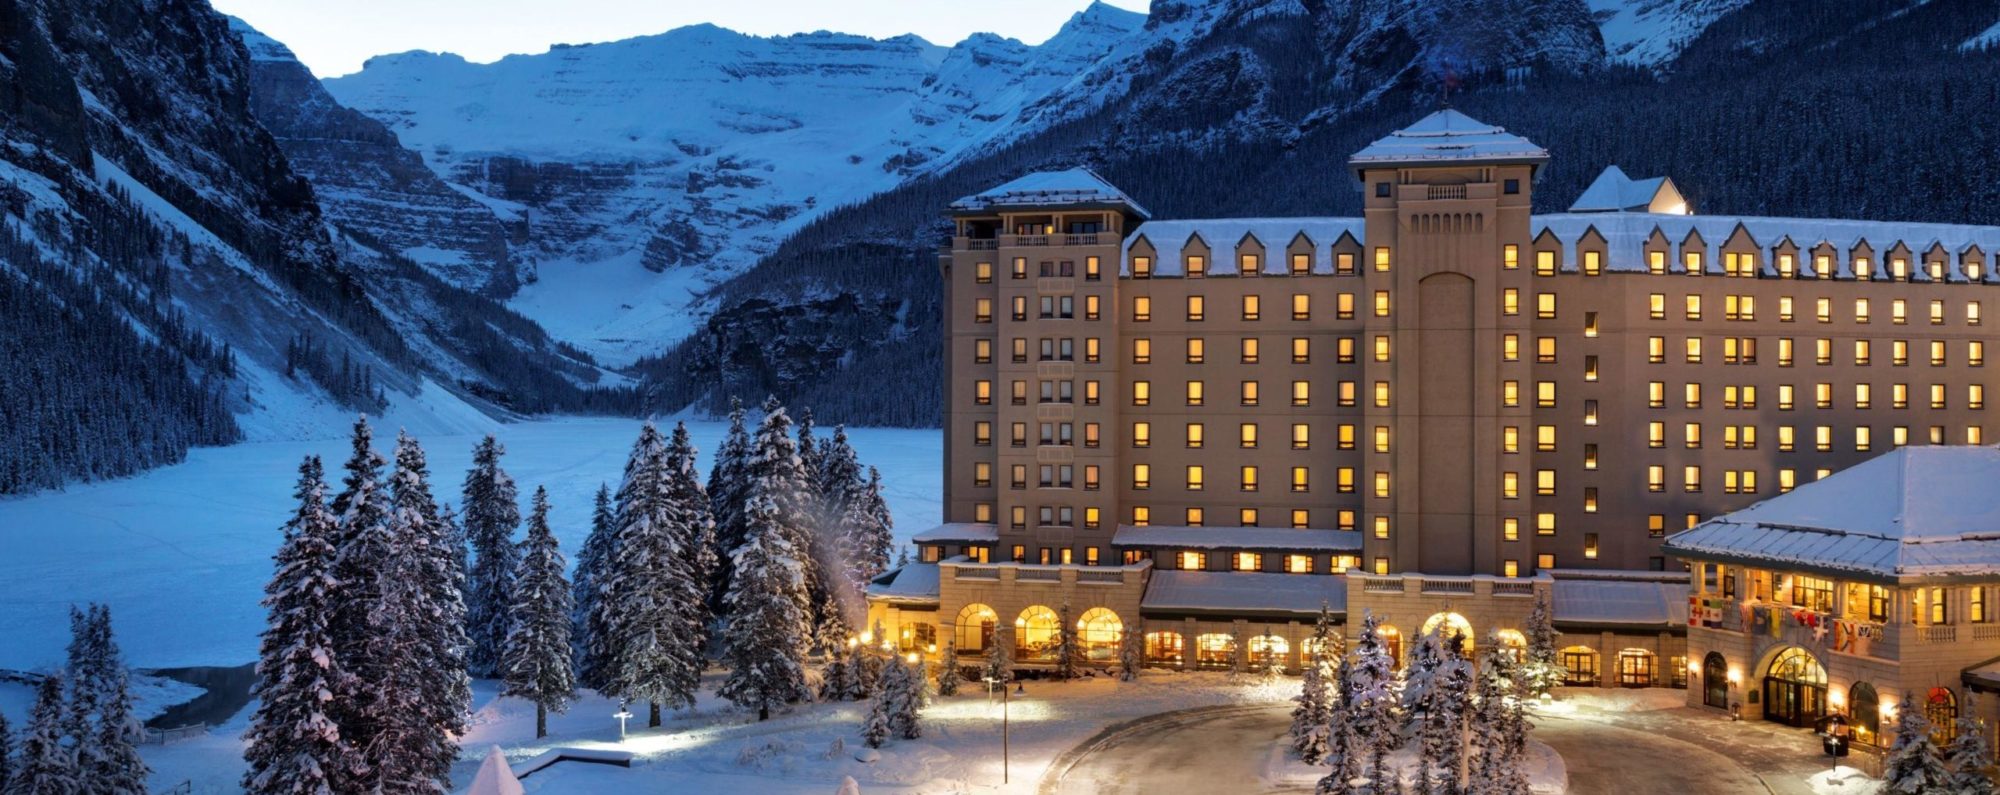 work at fairmont hotels canada